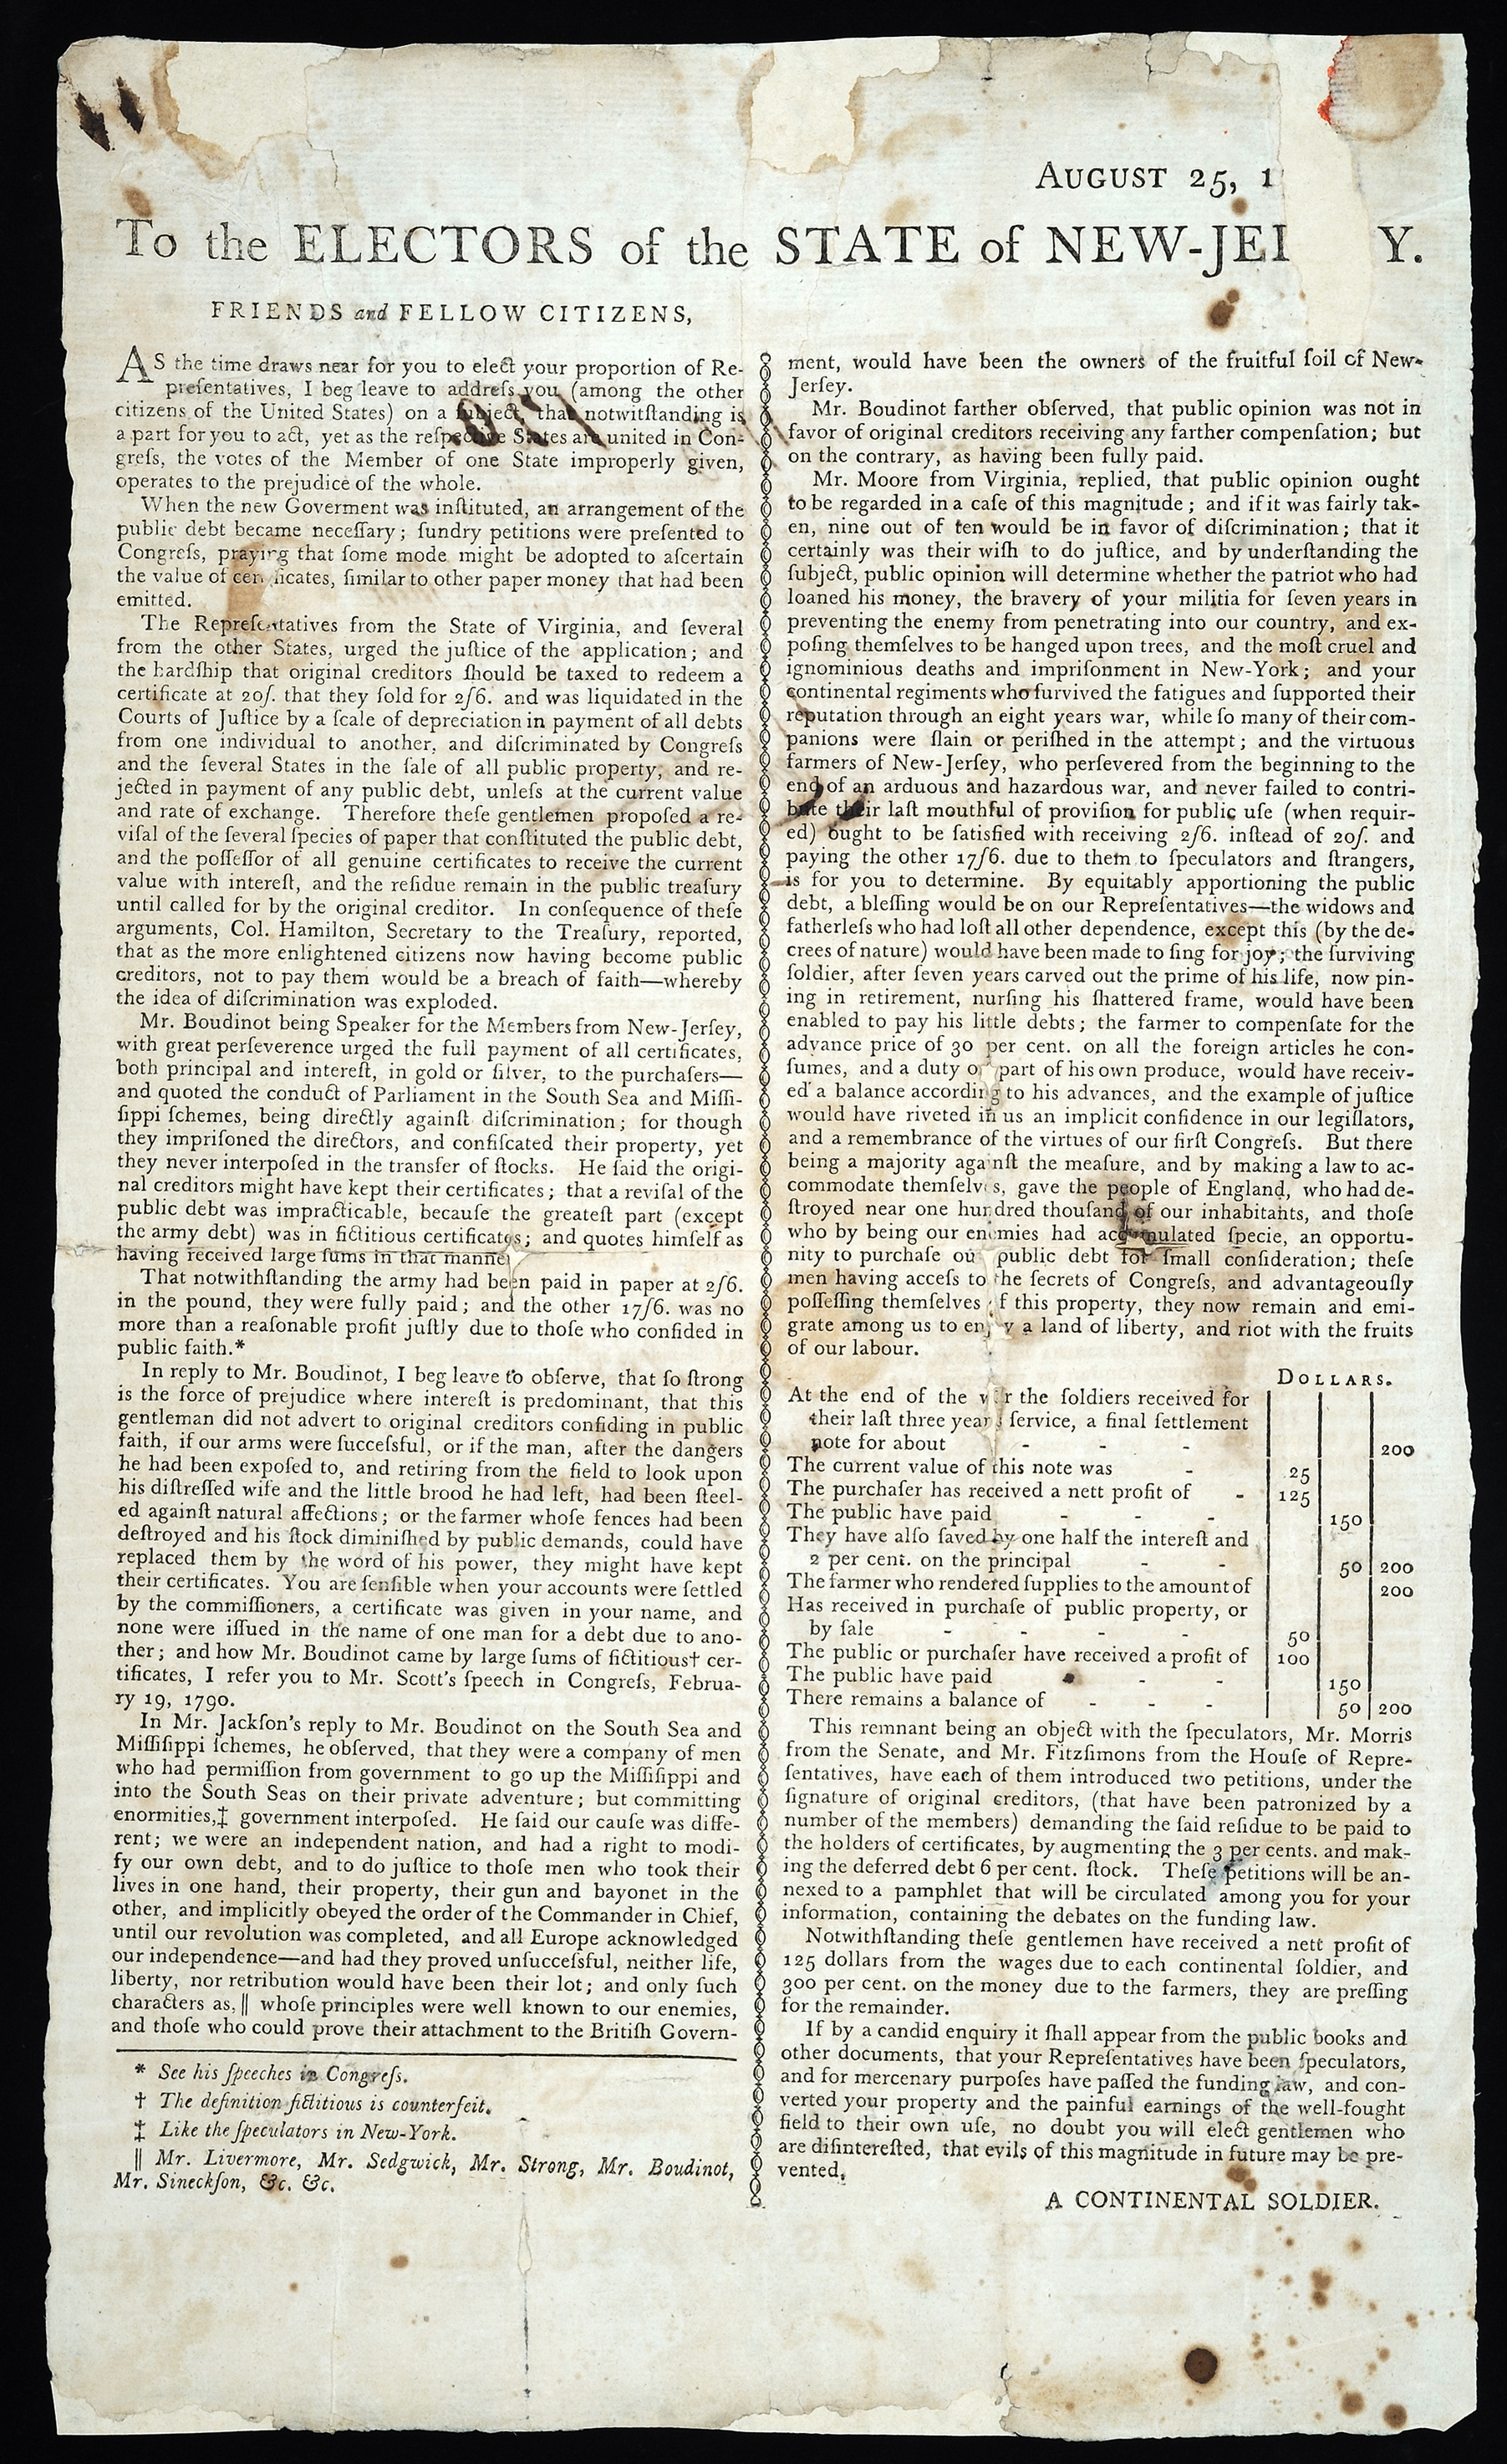 To the Electors of the State of New-Jersey broadside, 1792